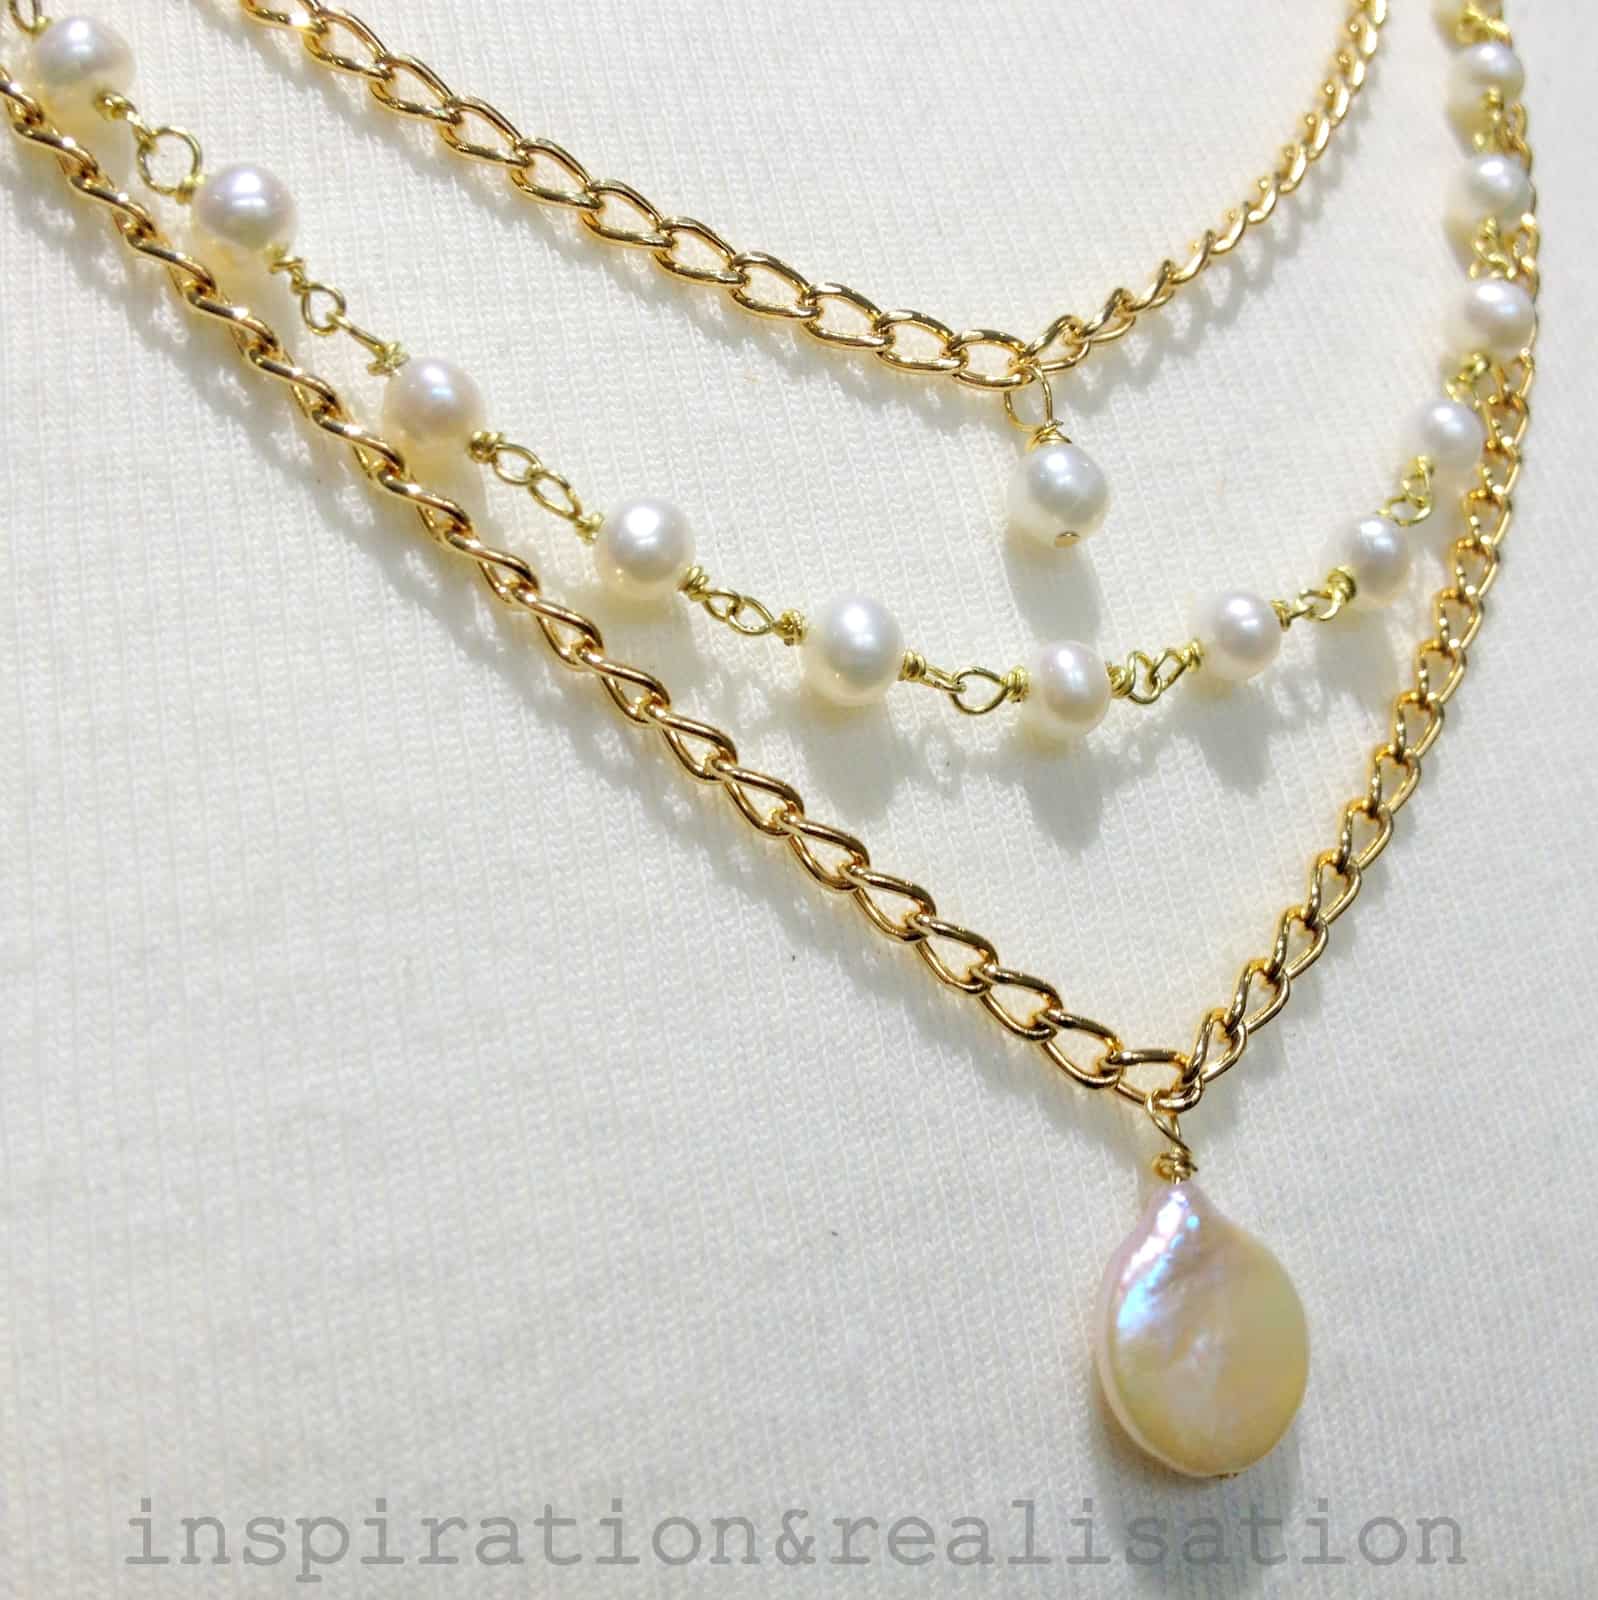 Triple strand pearl necklace